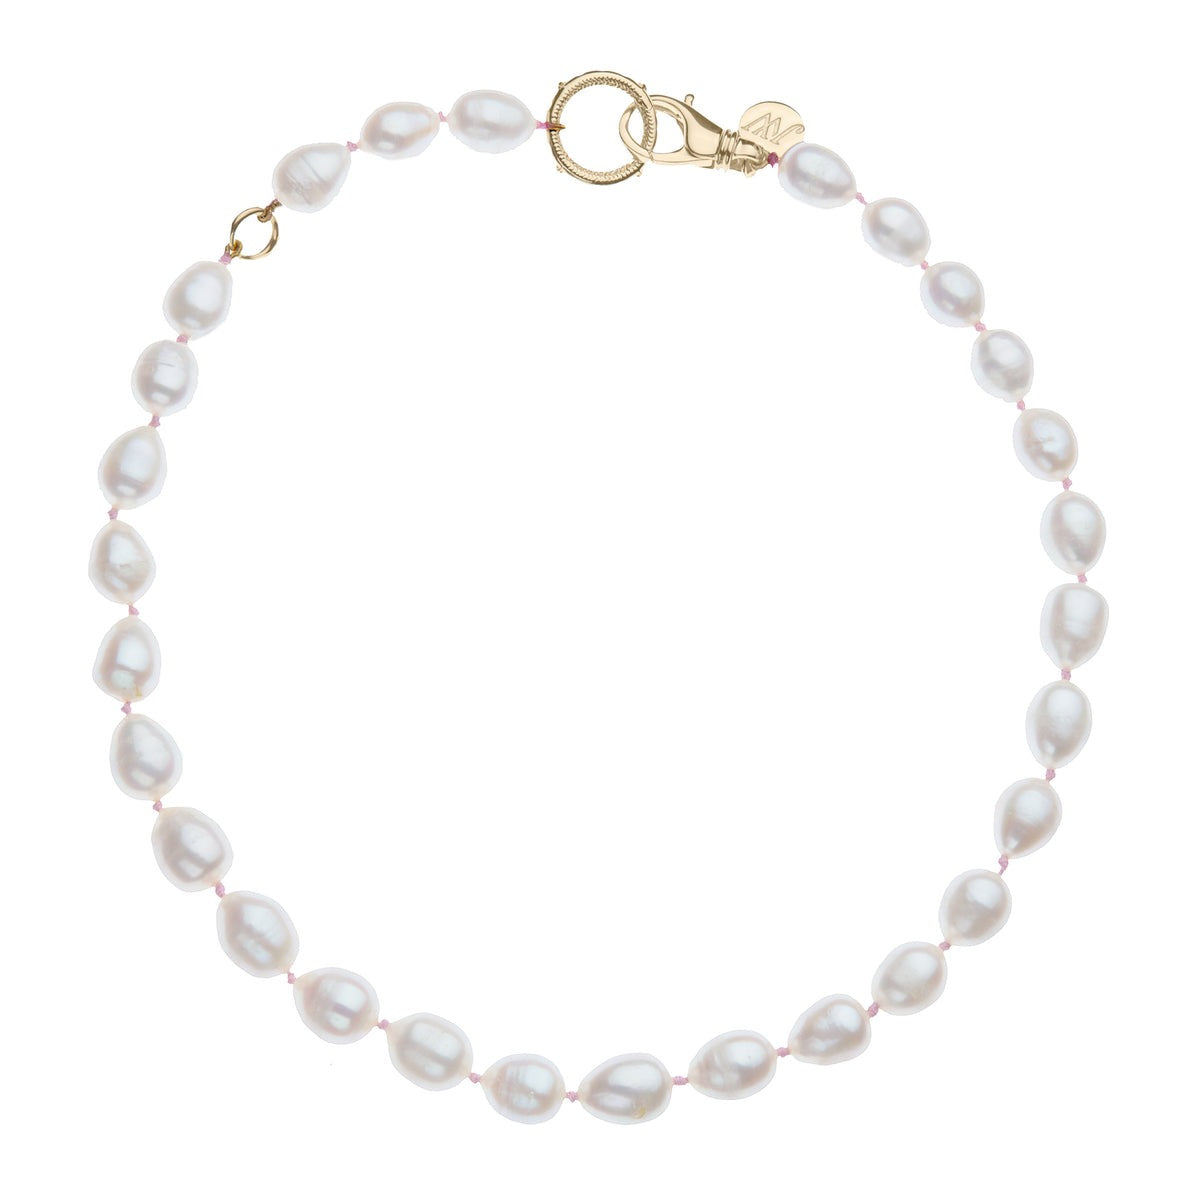 Jane Win White Pearl Lariat Adjustable Necklace